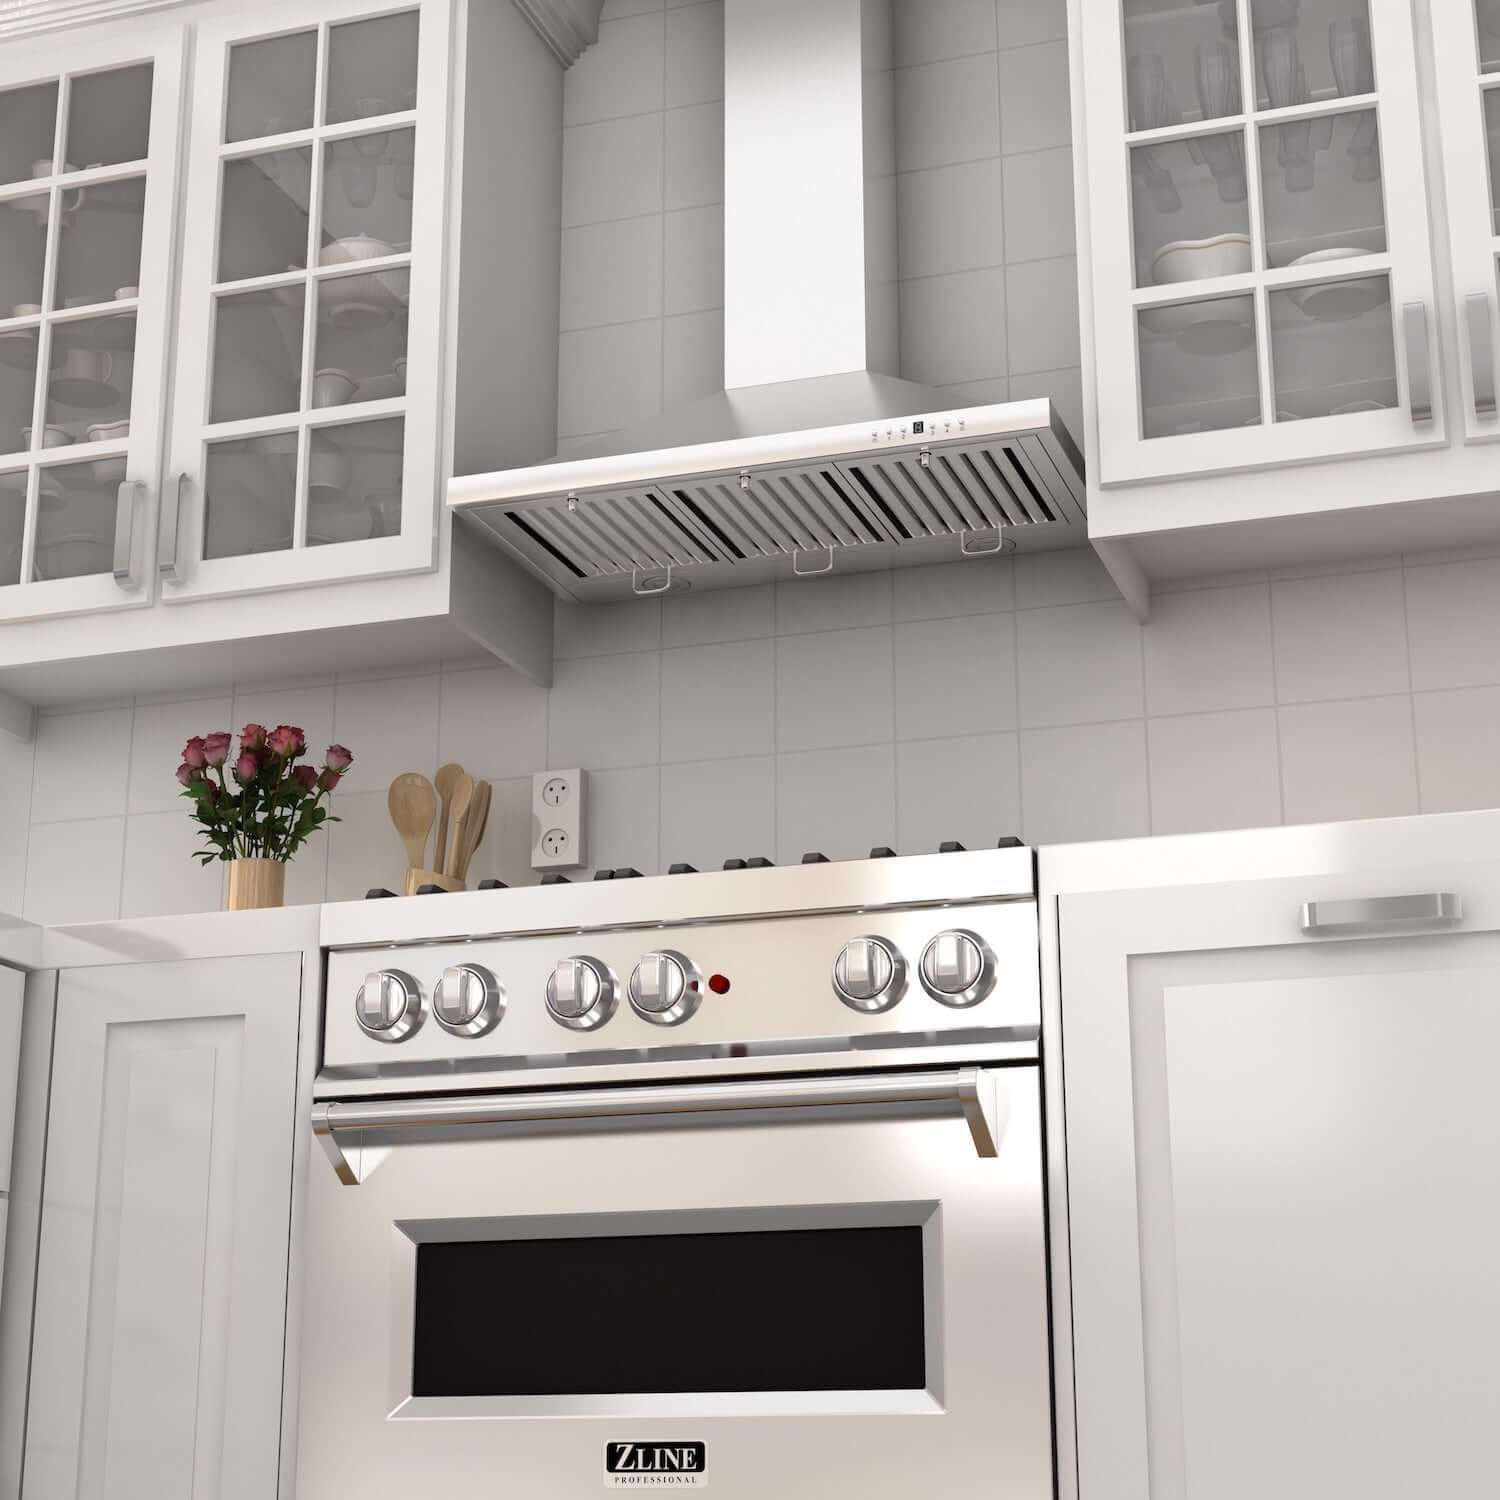 ZLINE Stainless Steel Convertible Vent Wall Mount Range Hood in a kitchen above a range rendering from below.